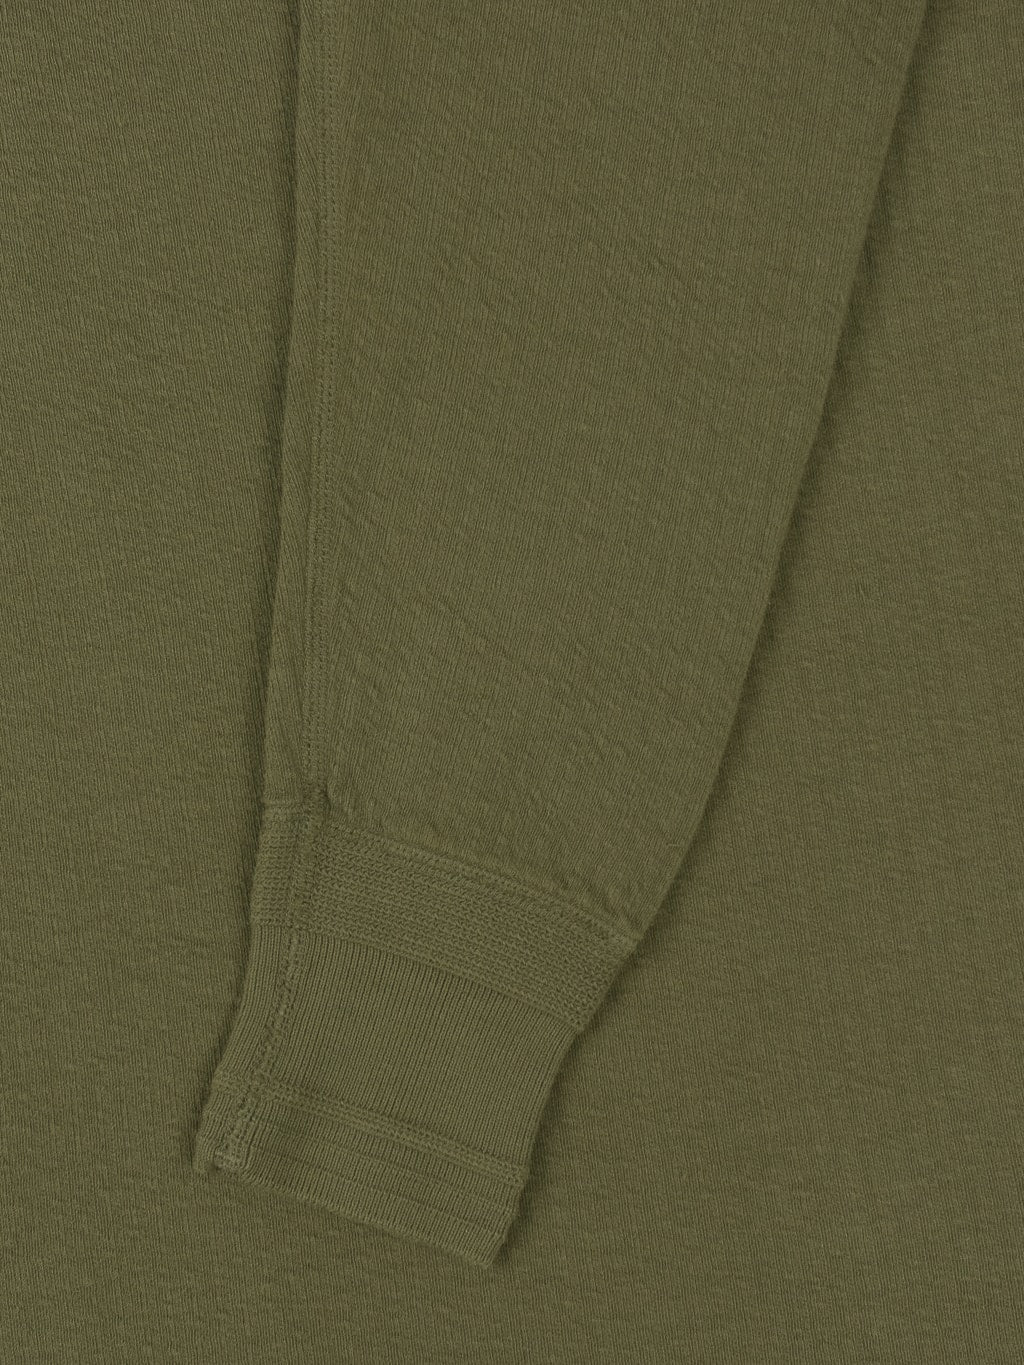 Loop Weft Double Face Jacquard henley Thermal army olive  ribbed cuff